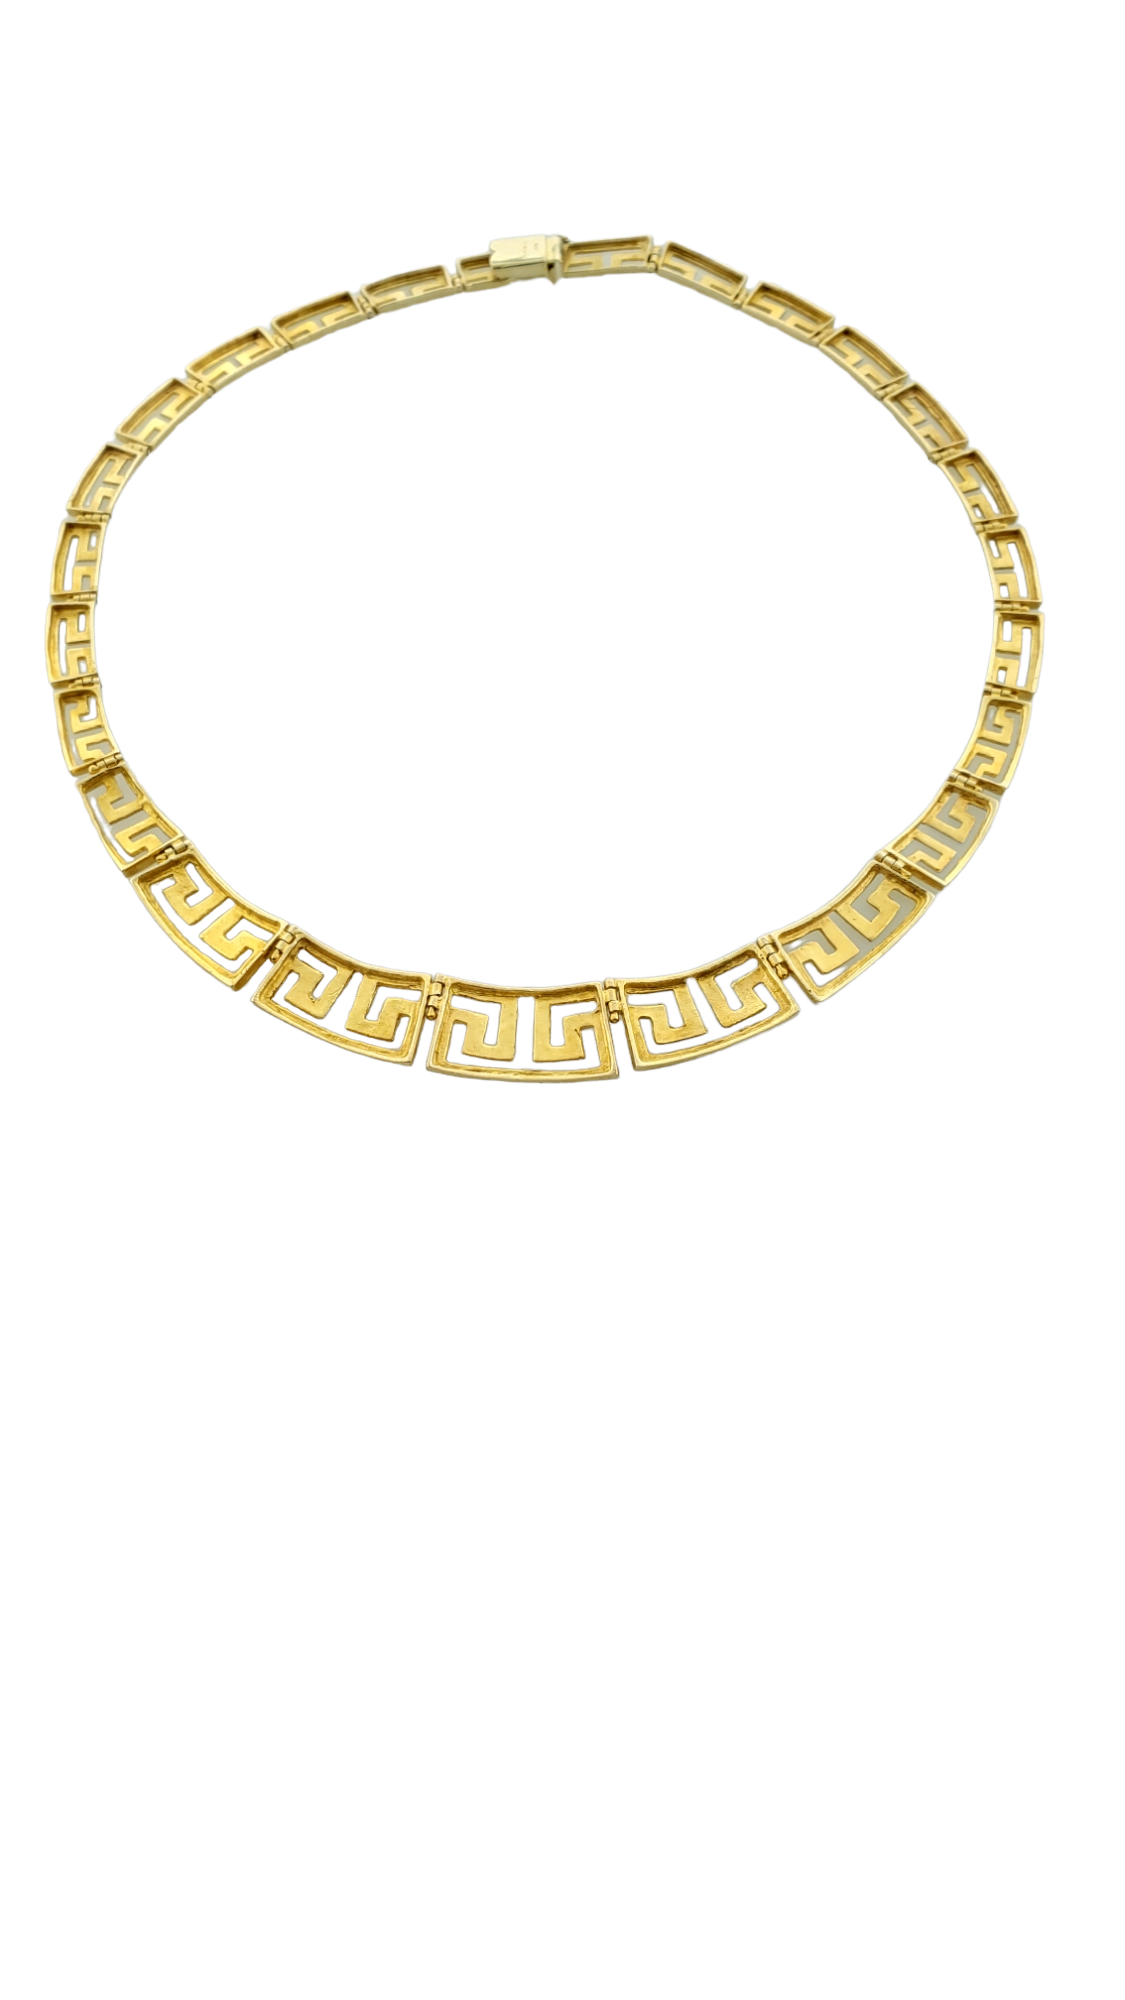 Greek Design 18 inch Necklace, 14kt Yellow Gold